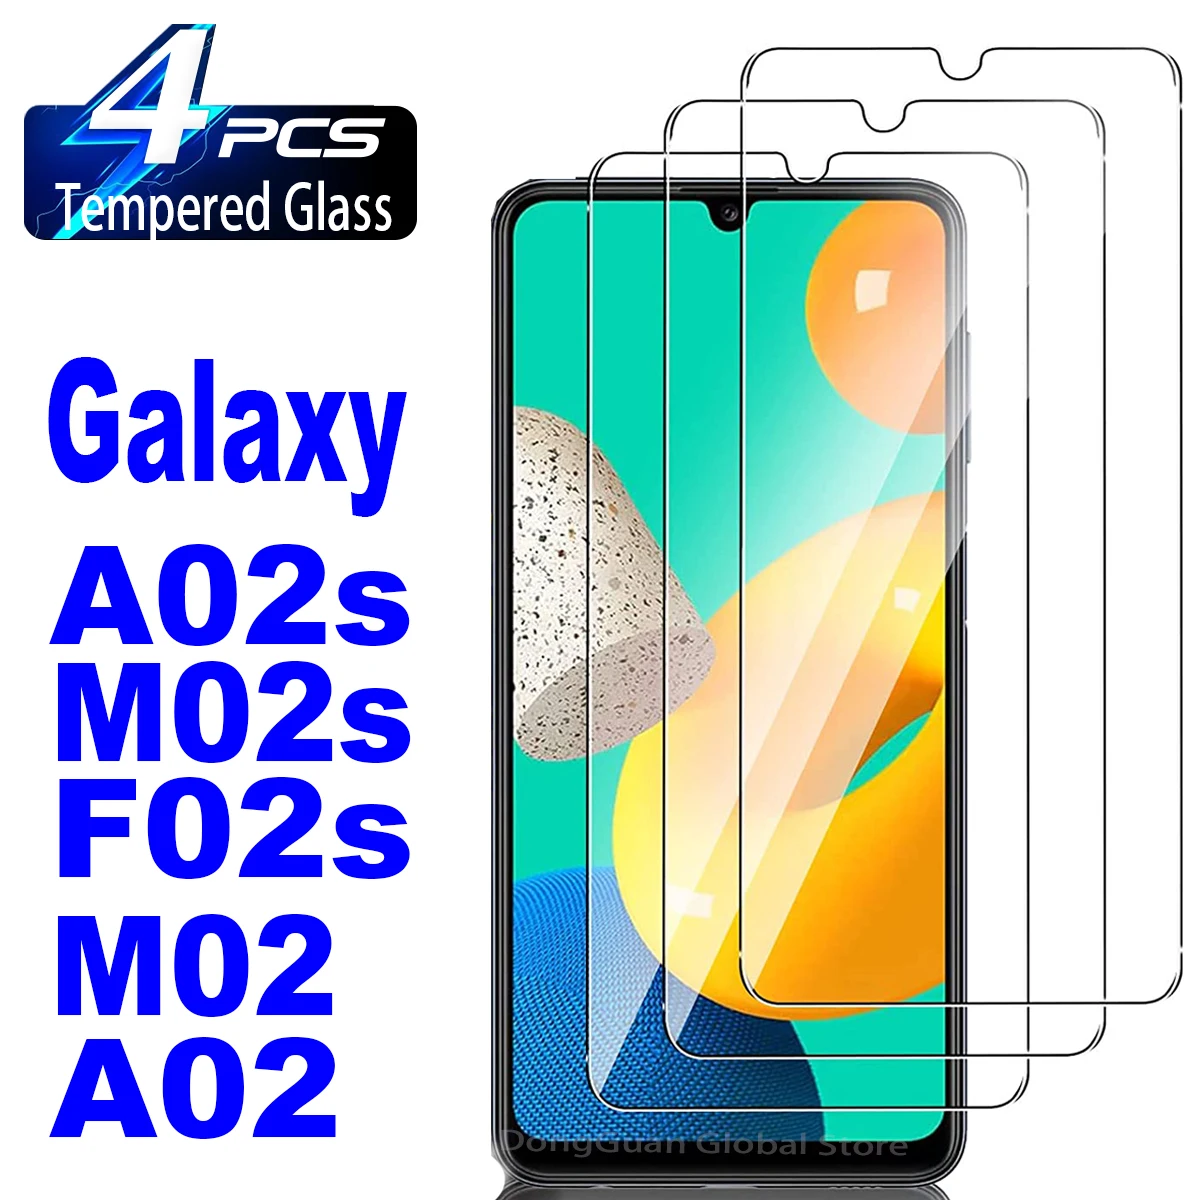 

2/4Pcs Tempered Glass For Samsung Galaxy A02 A02s M02 M02s F02s Screen Protector Glass Film